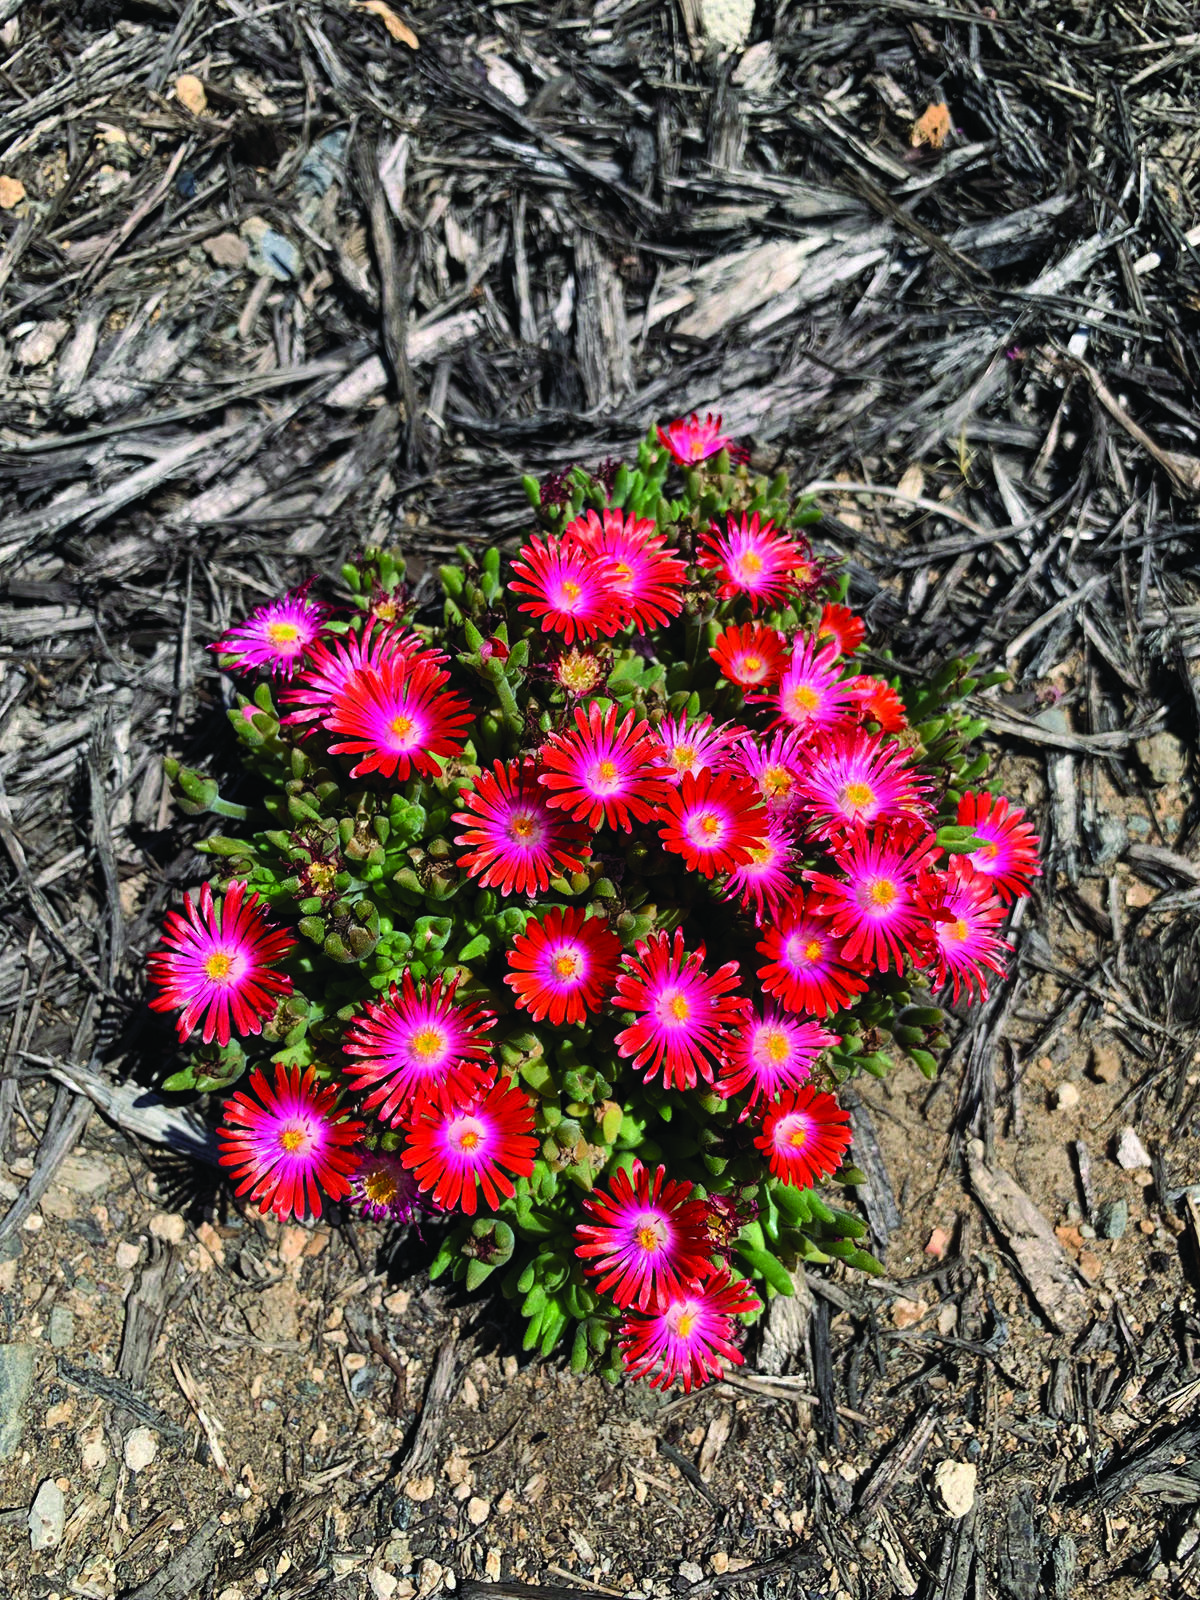 cluster of pink-red flowers with yellow centers on groundcover plant